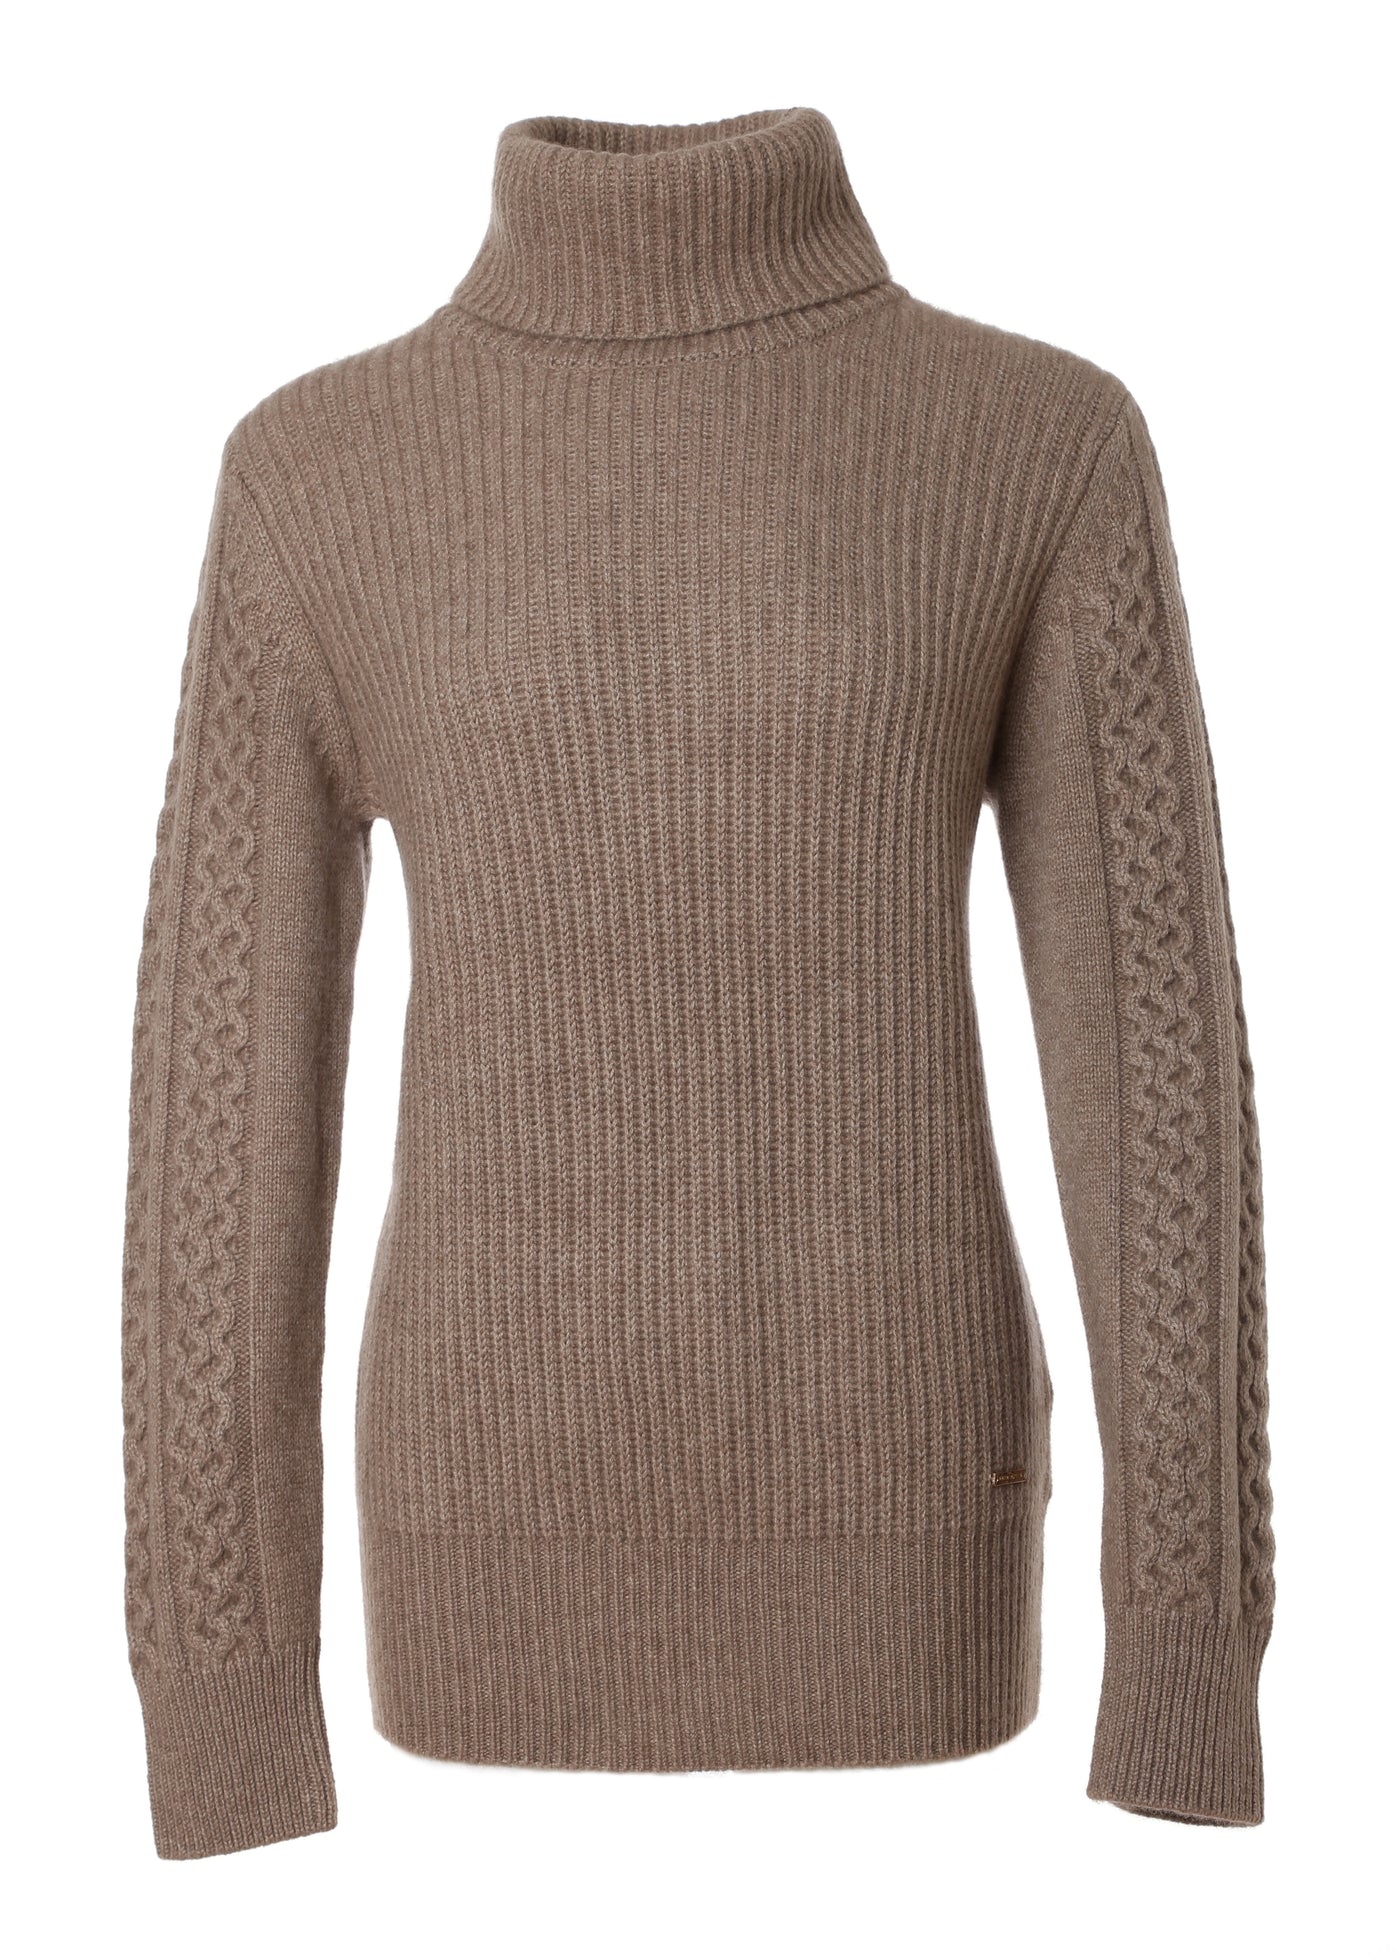 Turtleneck Rib & Cable Knit Cashmere Pullover